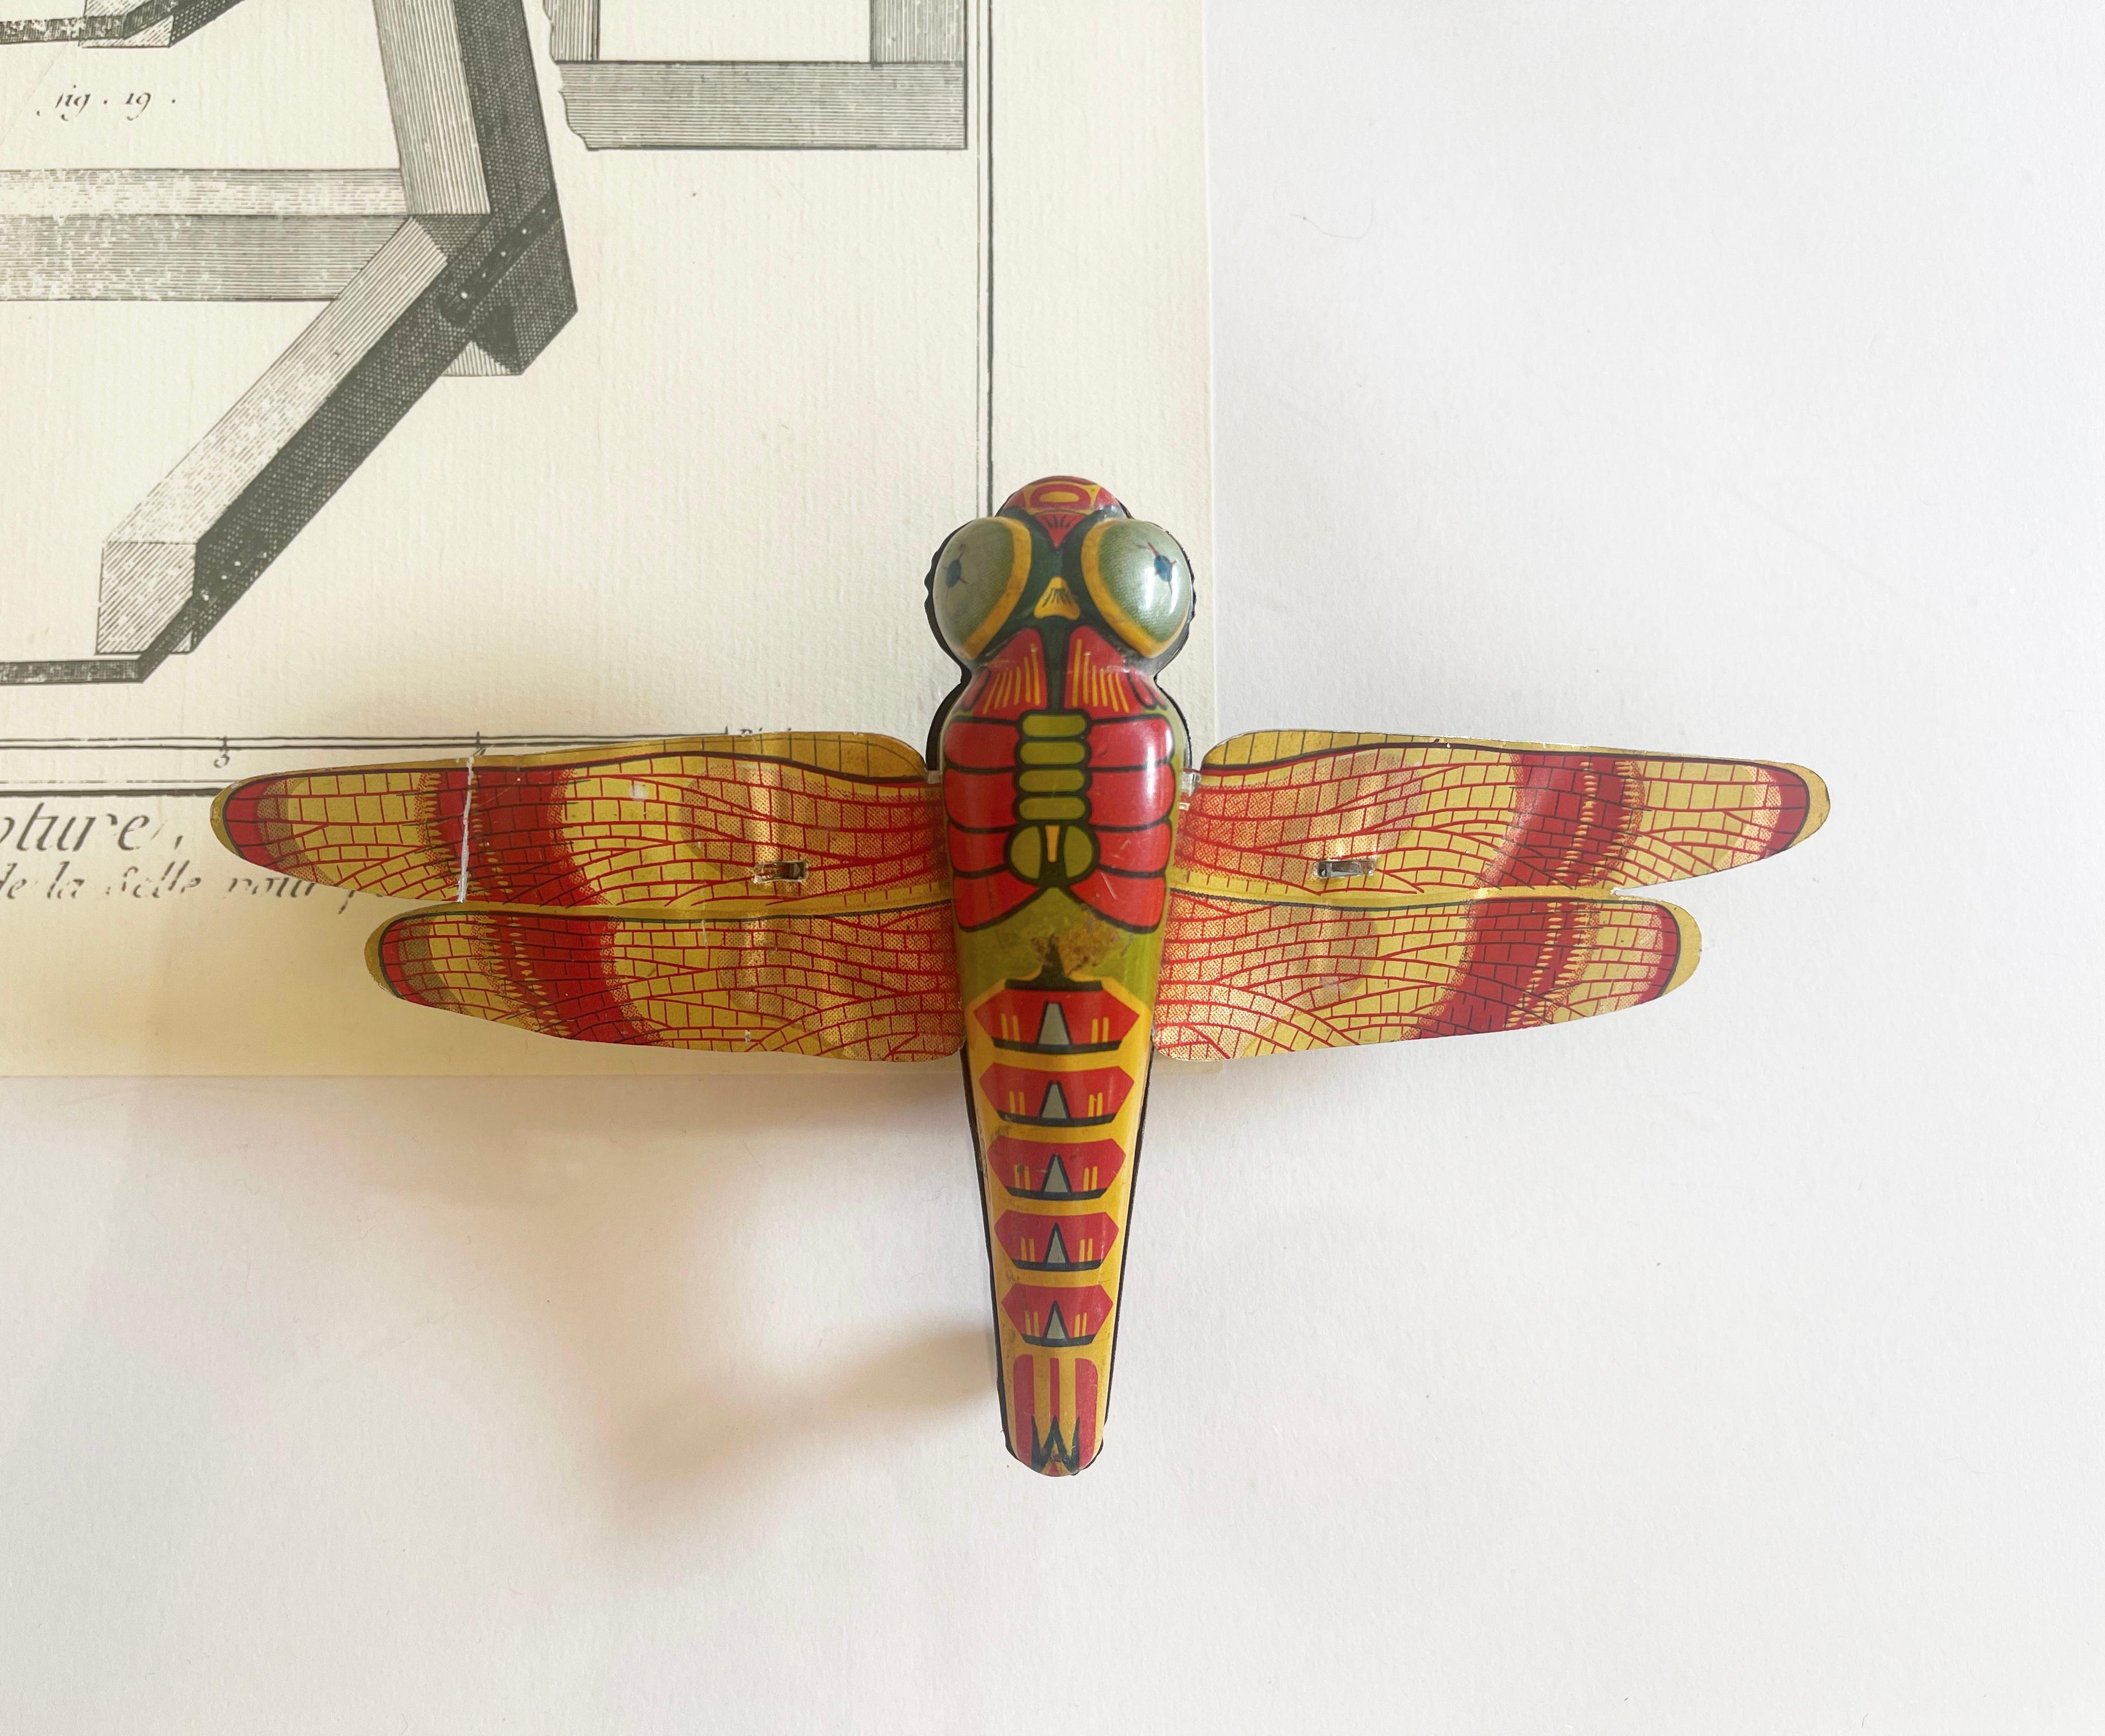 Mid-Century Modern Vintage Japanese Litho Wind-up Tin Toy Dragonfly 1940's to 1950's, Japan